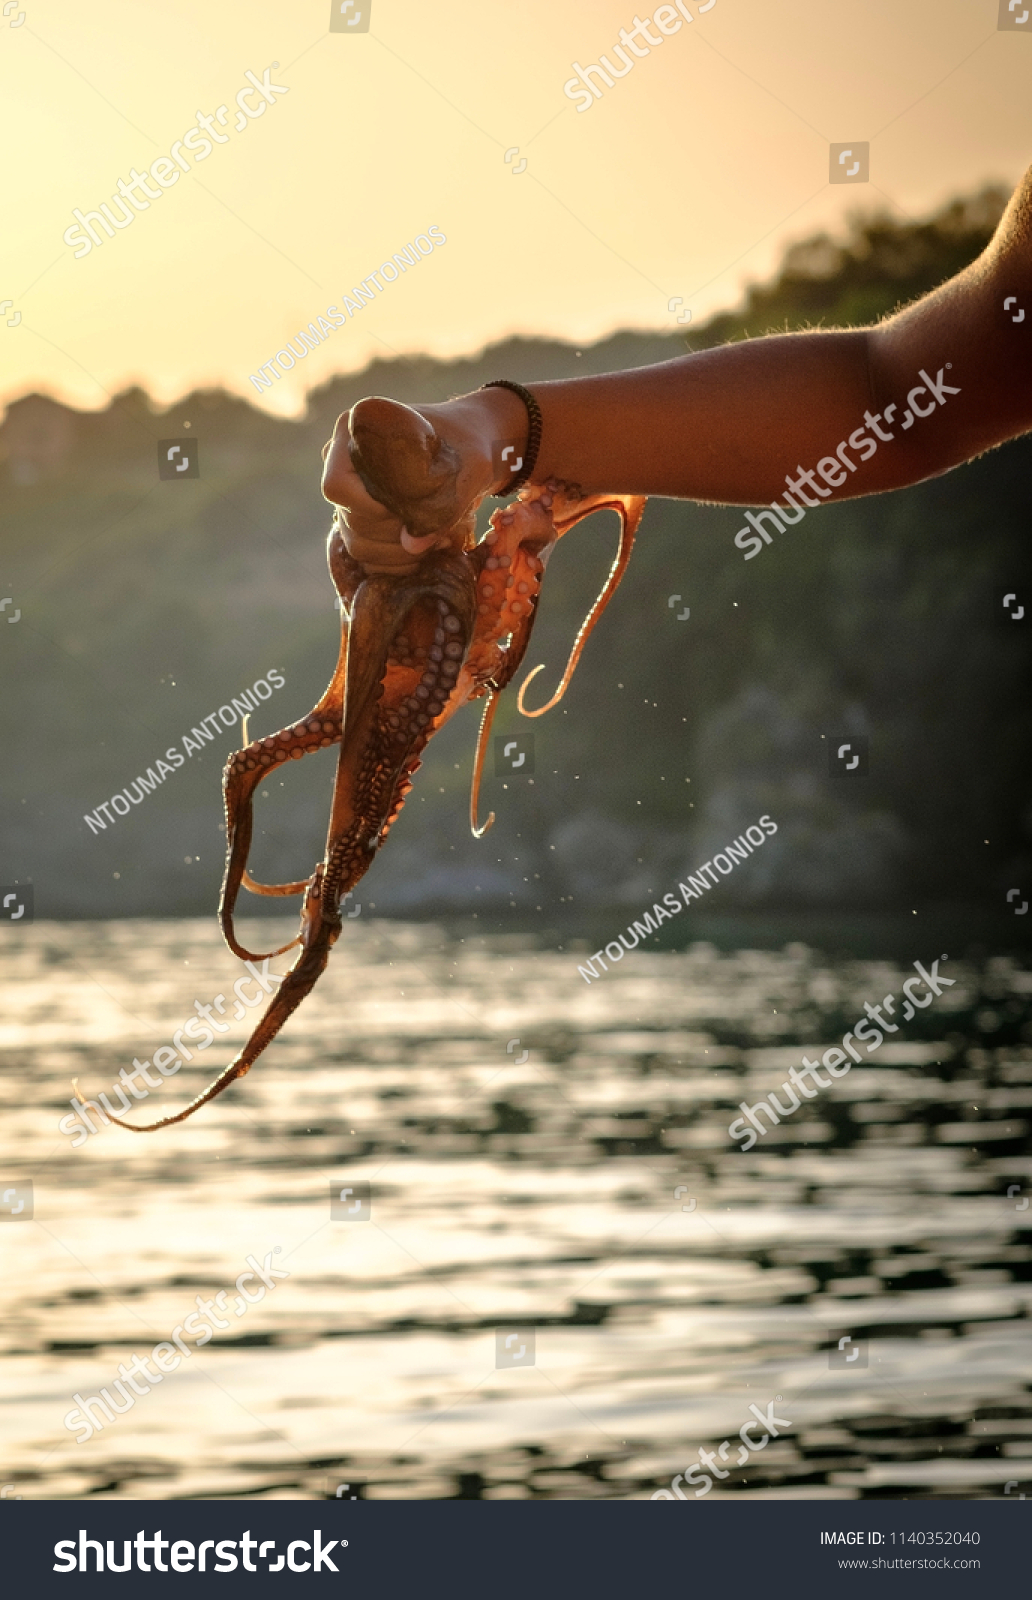 Hand of a child holding an octopus in Greece #1140352040